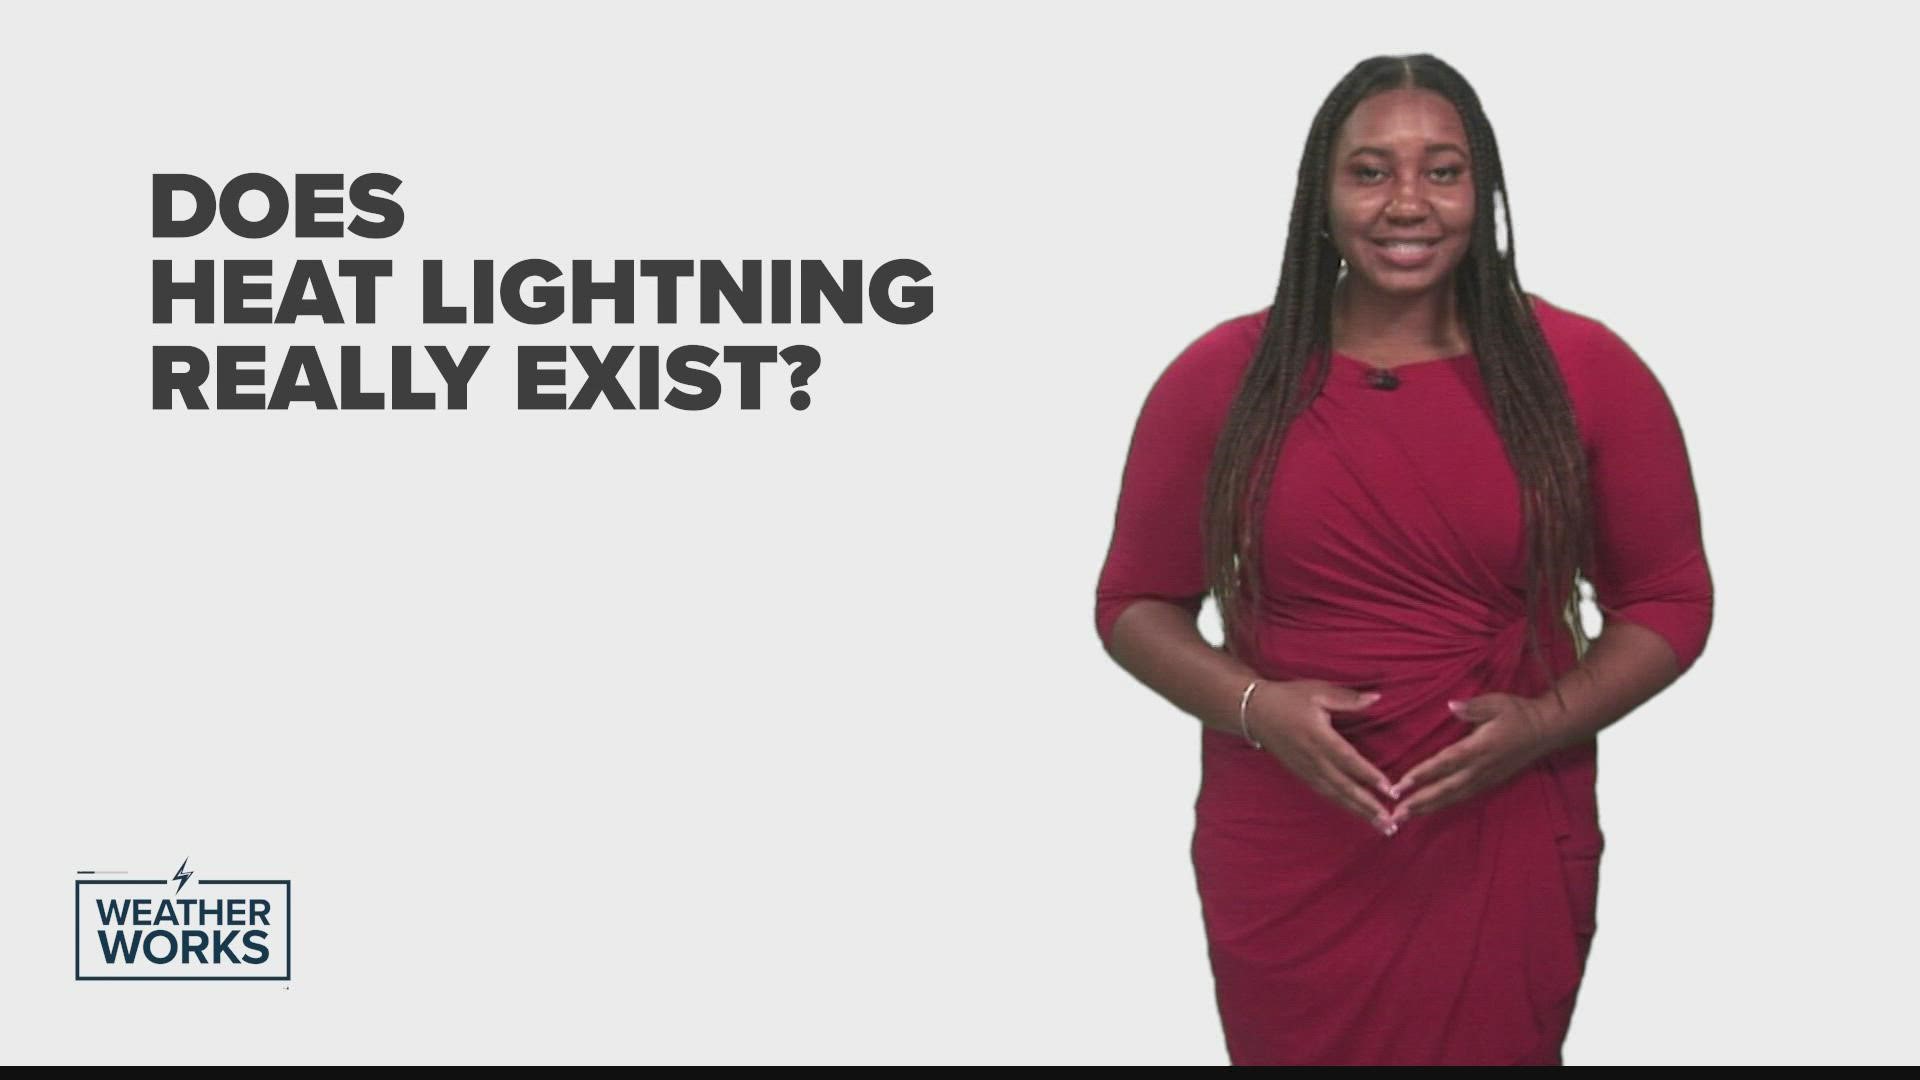 Meteorologist Taylor Stephenson tackles the truth behind heat lightning on this episode of Weather Works.